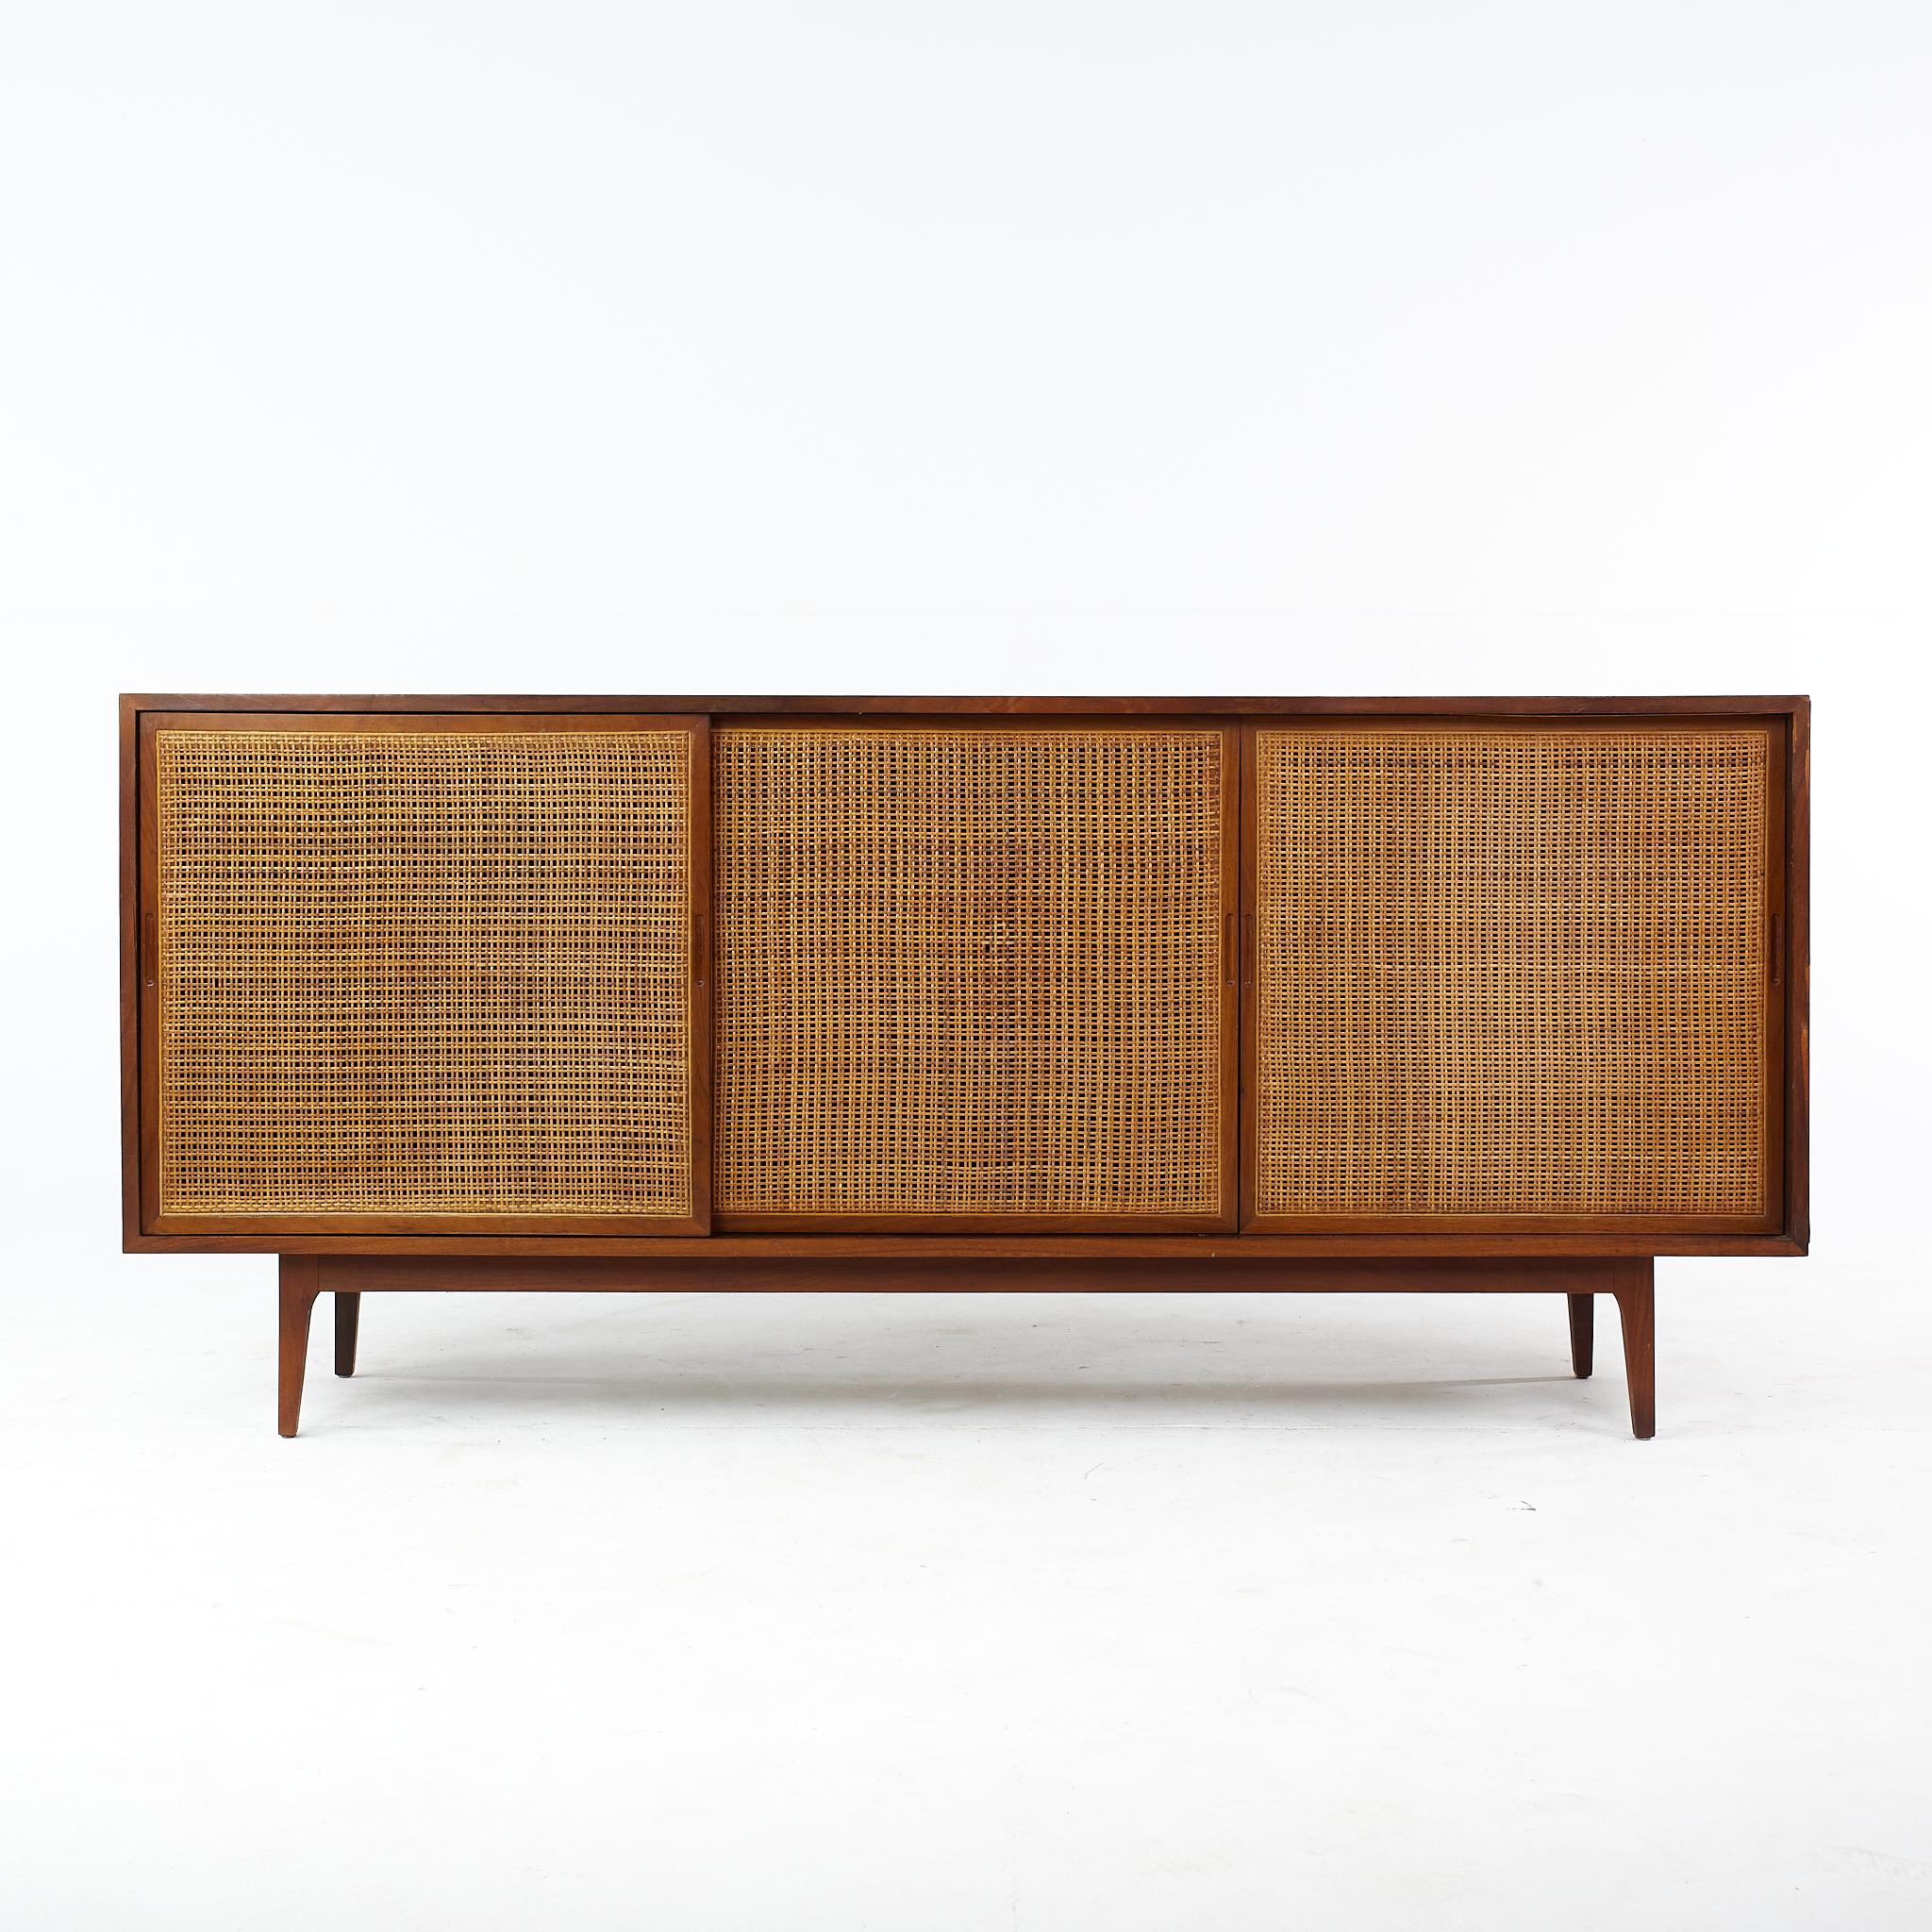 Founders Stylemid century walnut and cane front credenza

This credenza measures: 71.75 wide x 18 deep x 32 inches high

All pieces of furniture can be had in what we call restored vintage condition. That means the piece is restored upon